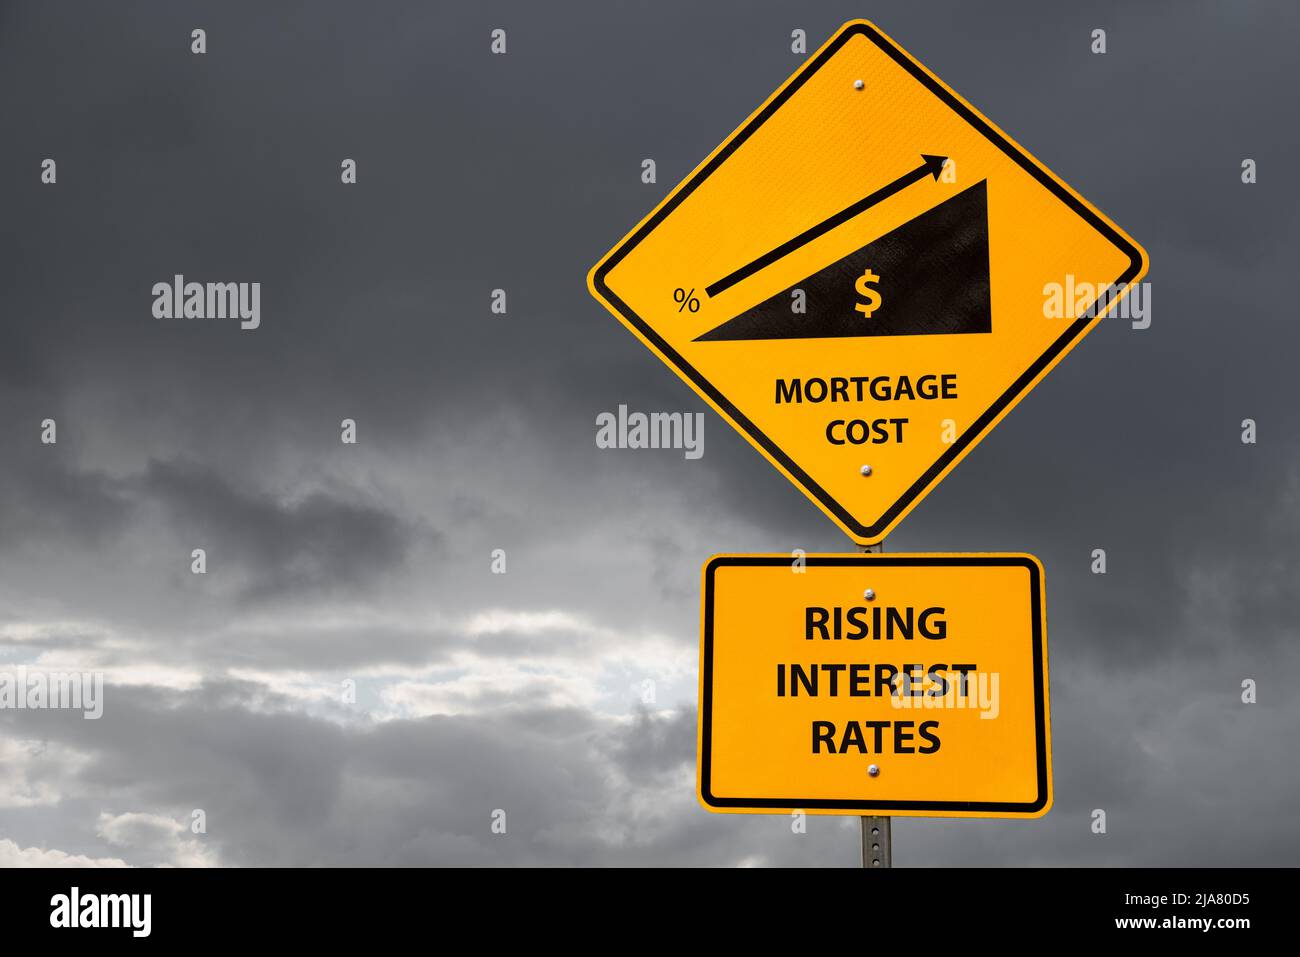 Conceptual sign about rising mortgage costs due to higher interest rates with storm sky in background. Business and finance concept. Copy space. Stock Photo